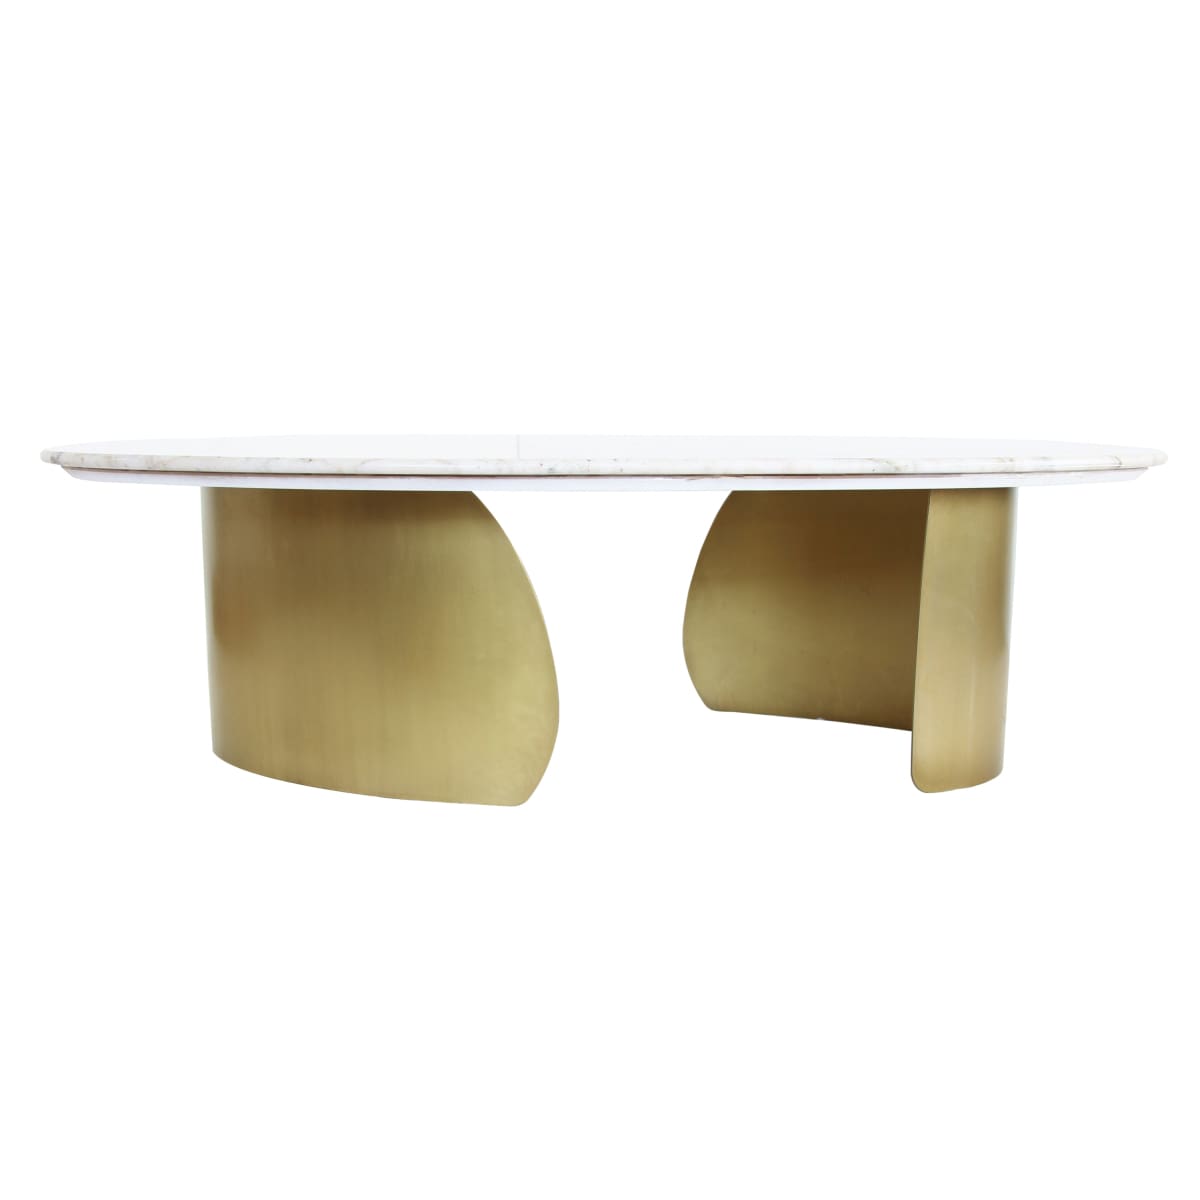 Mataeo Marble Top Coffee Table - coffee-tables